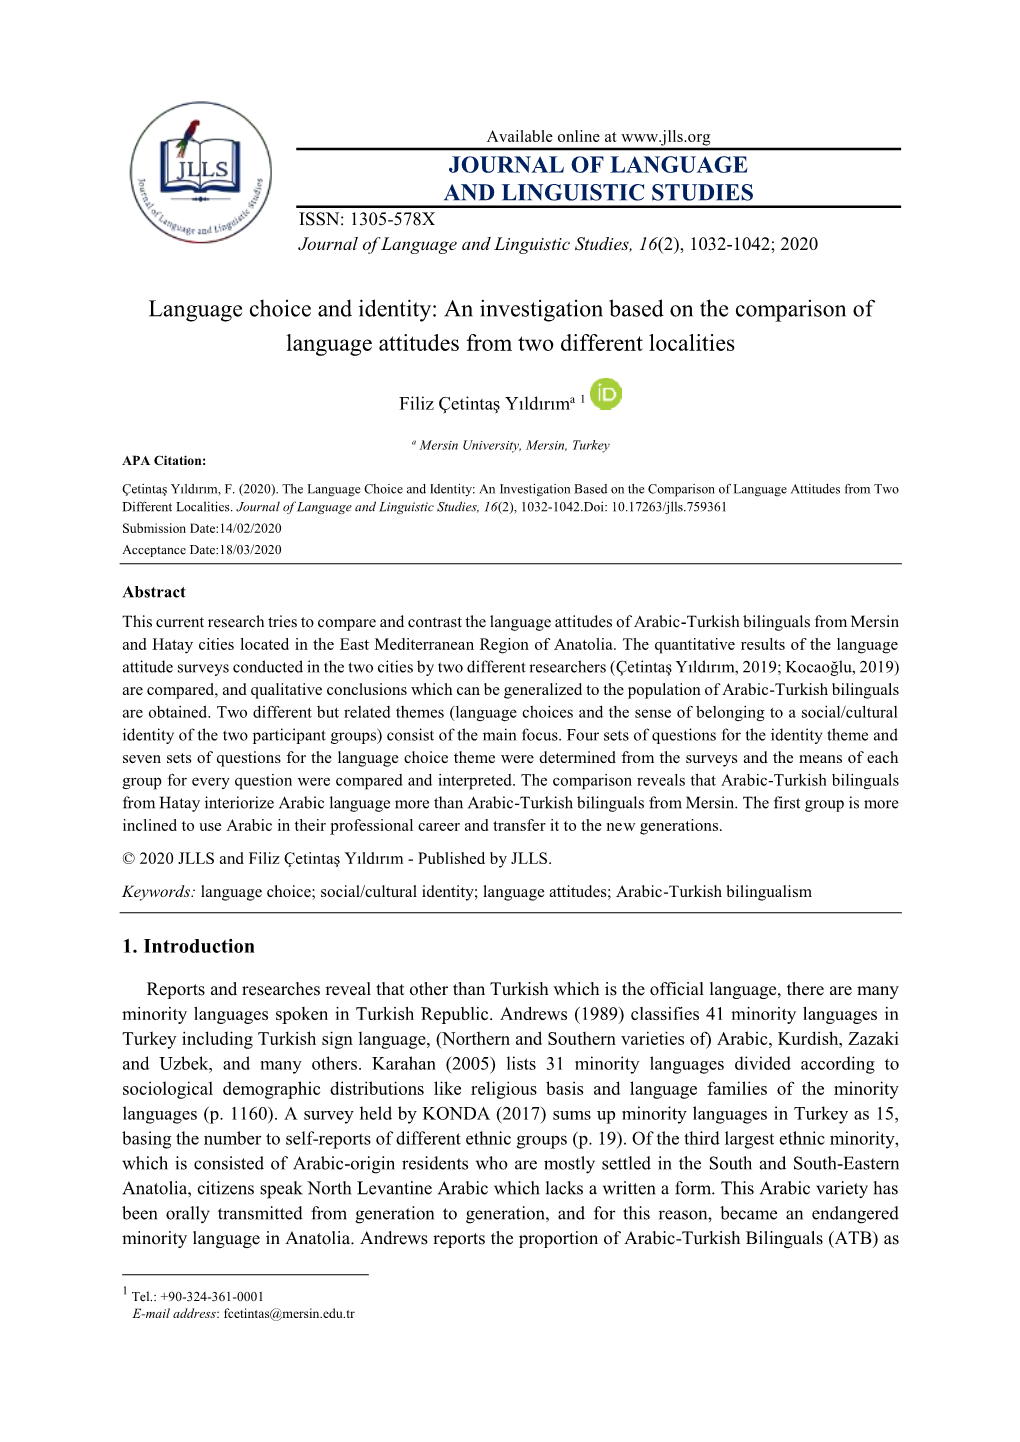 Language Choice and Identity: an Investigation Based on the Comparison of Language Attitudes from Two Different Localities